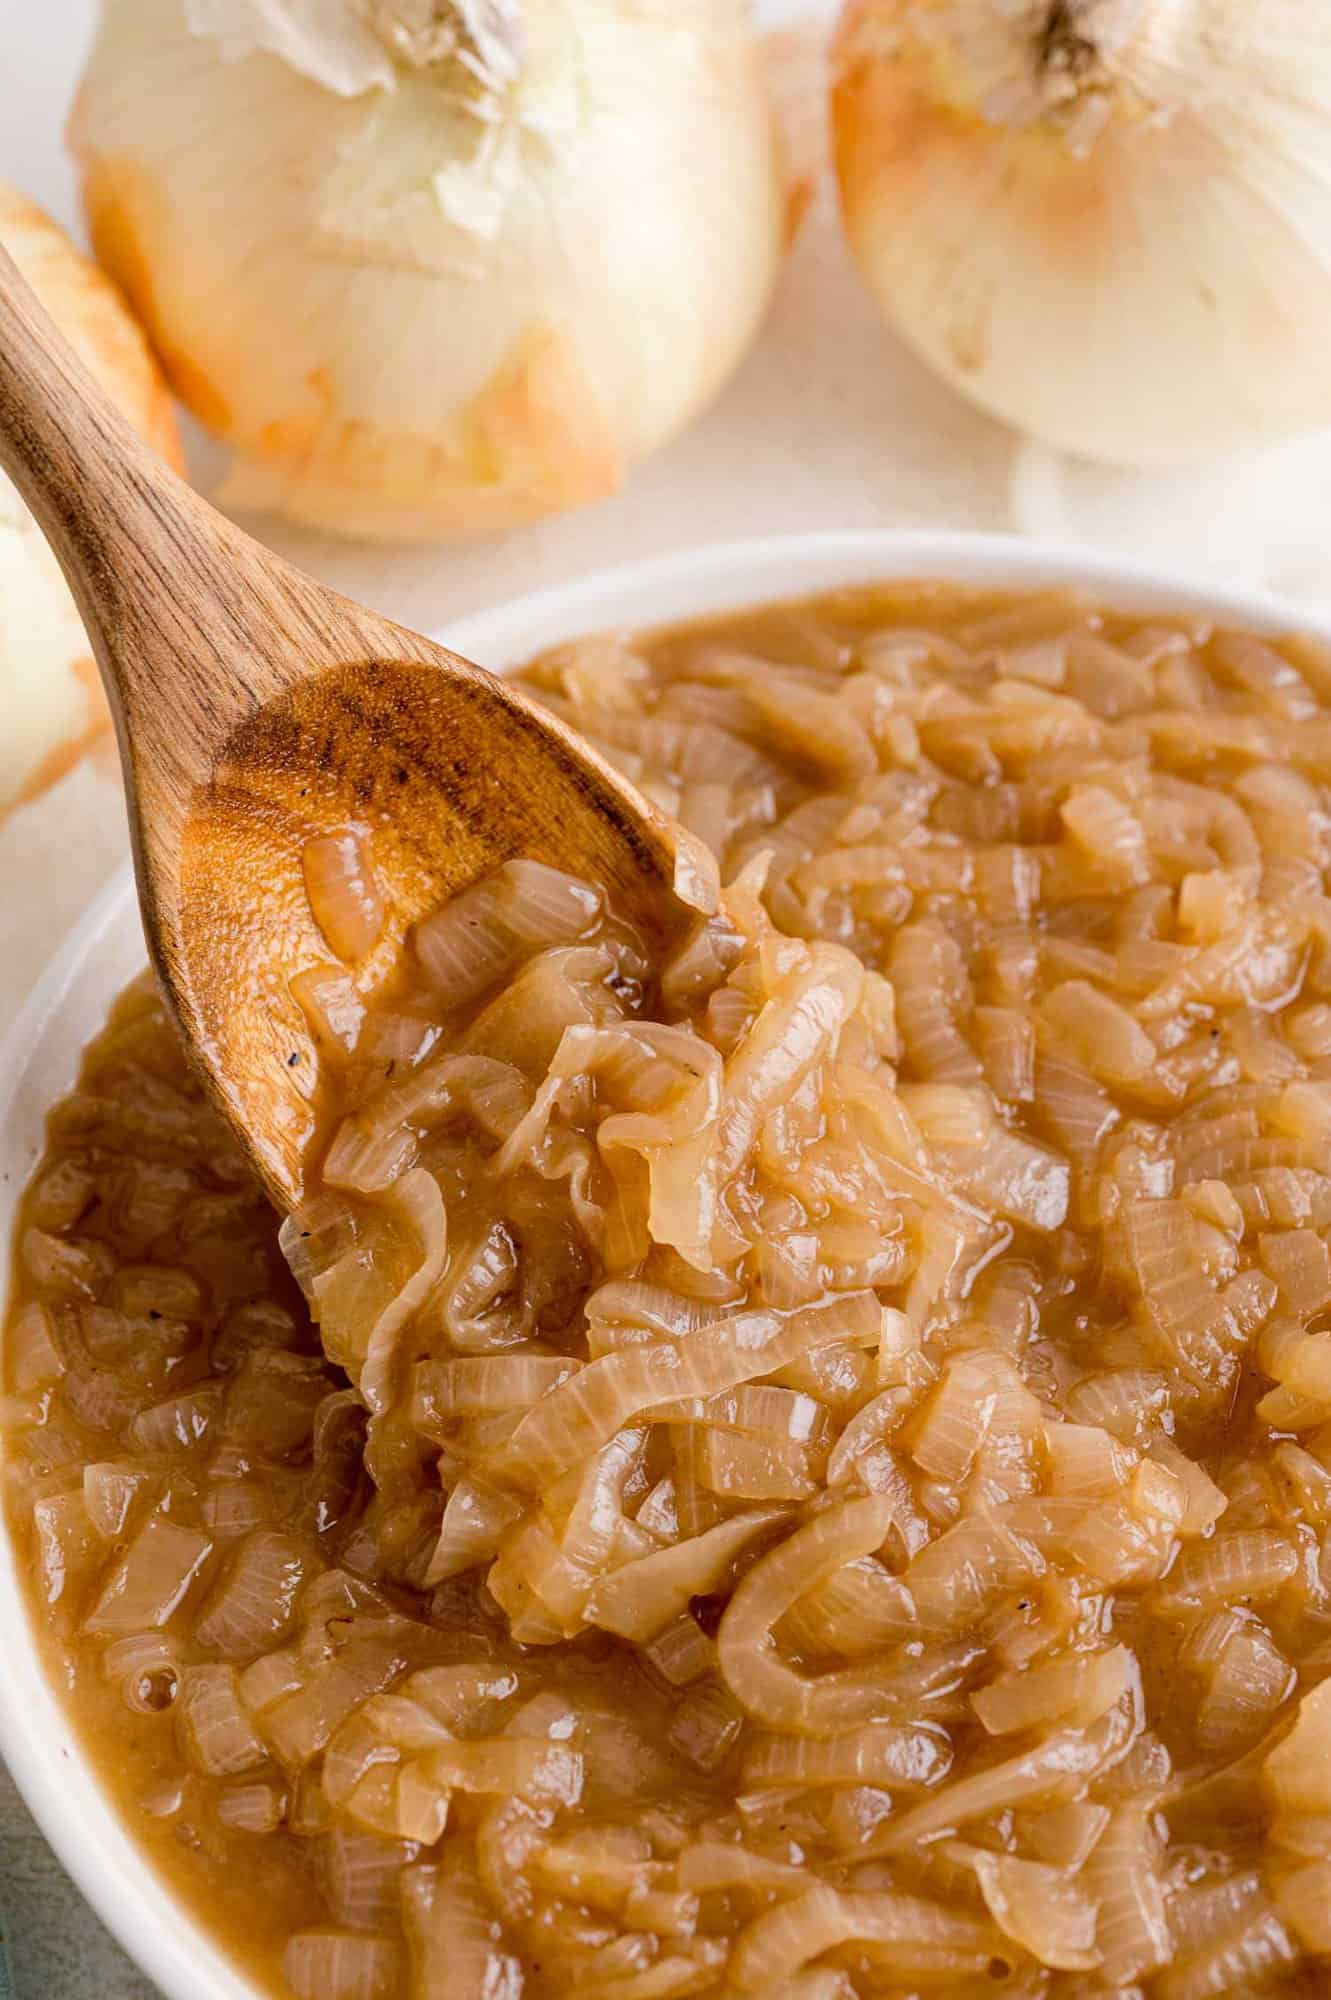 Caramelized onions in a bowl and on a spoon.